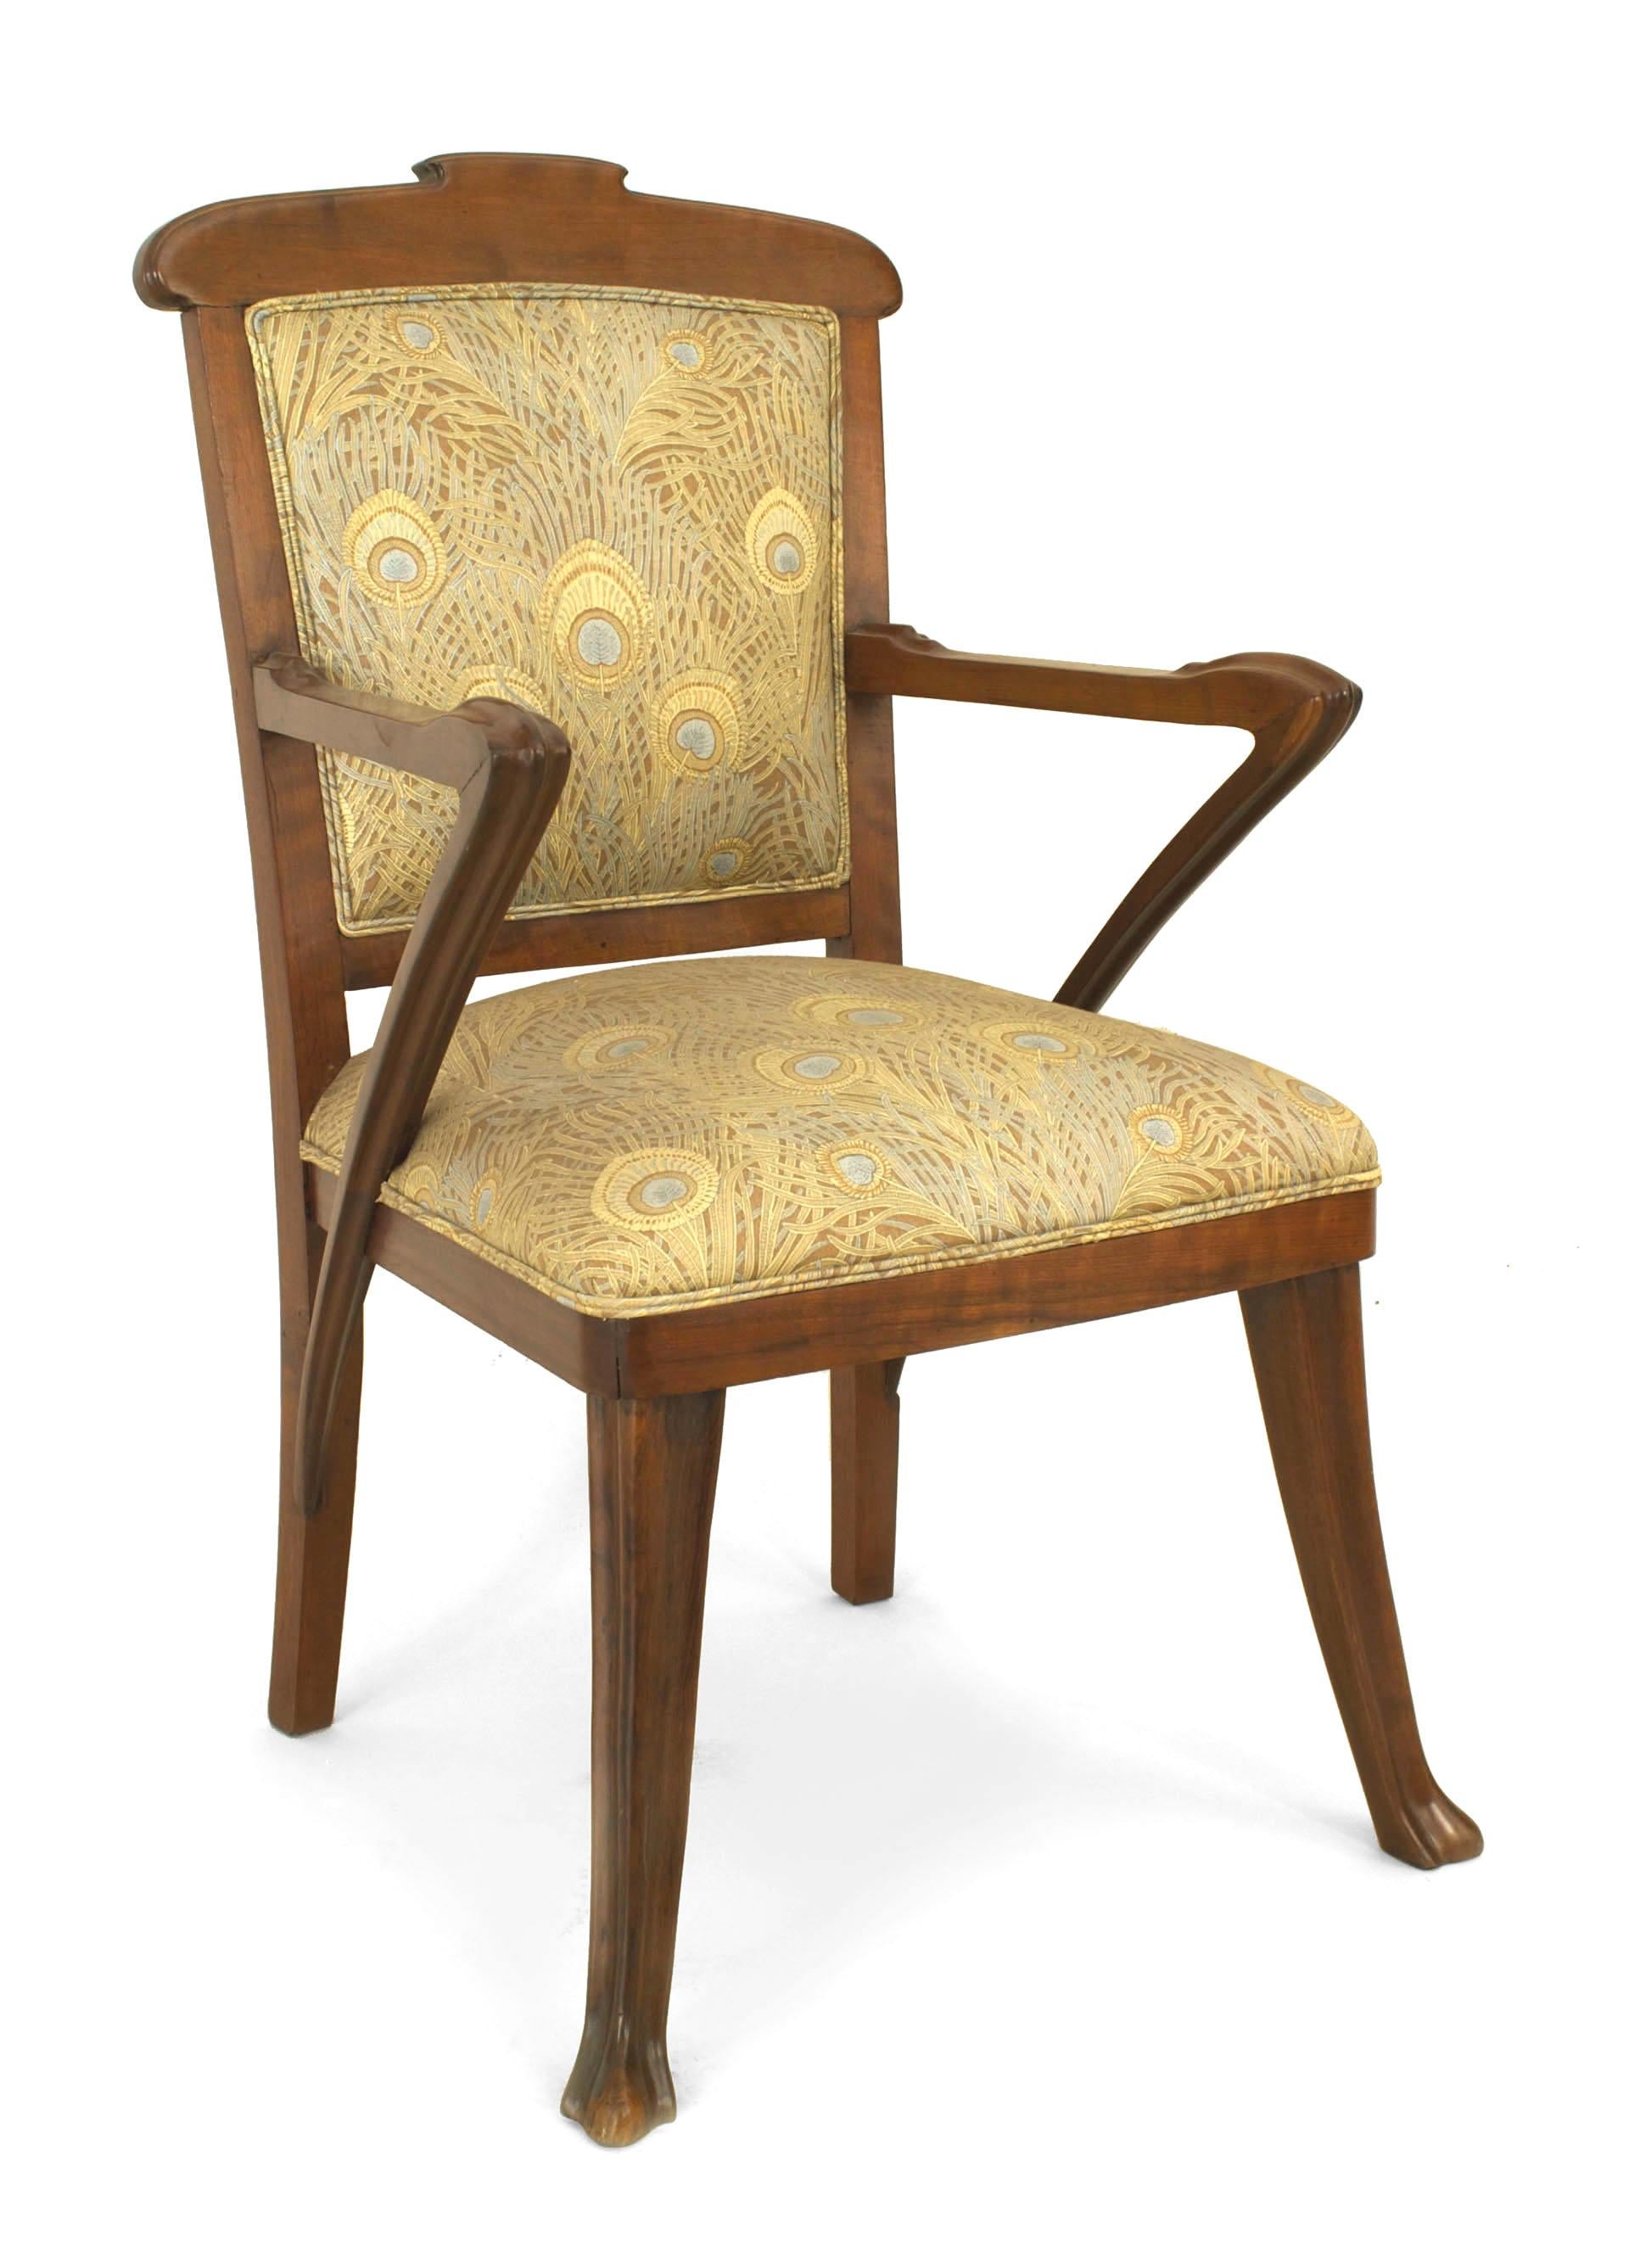 Set of 4 French Art Nouveau walnut open armchairs with upholstered peacock feather design seats and backs. (PRICED AS SET)
